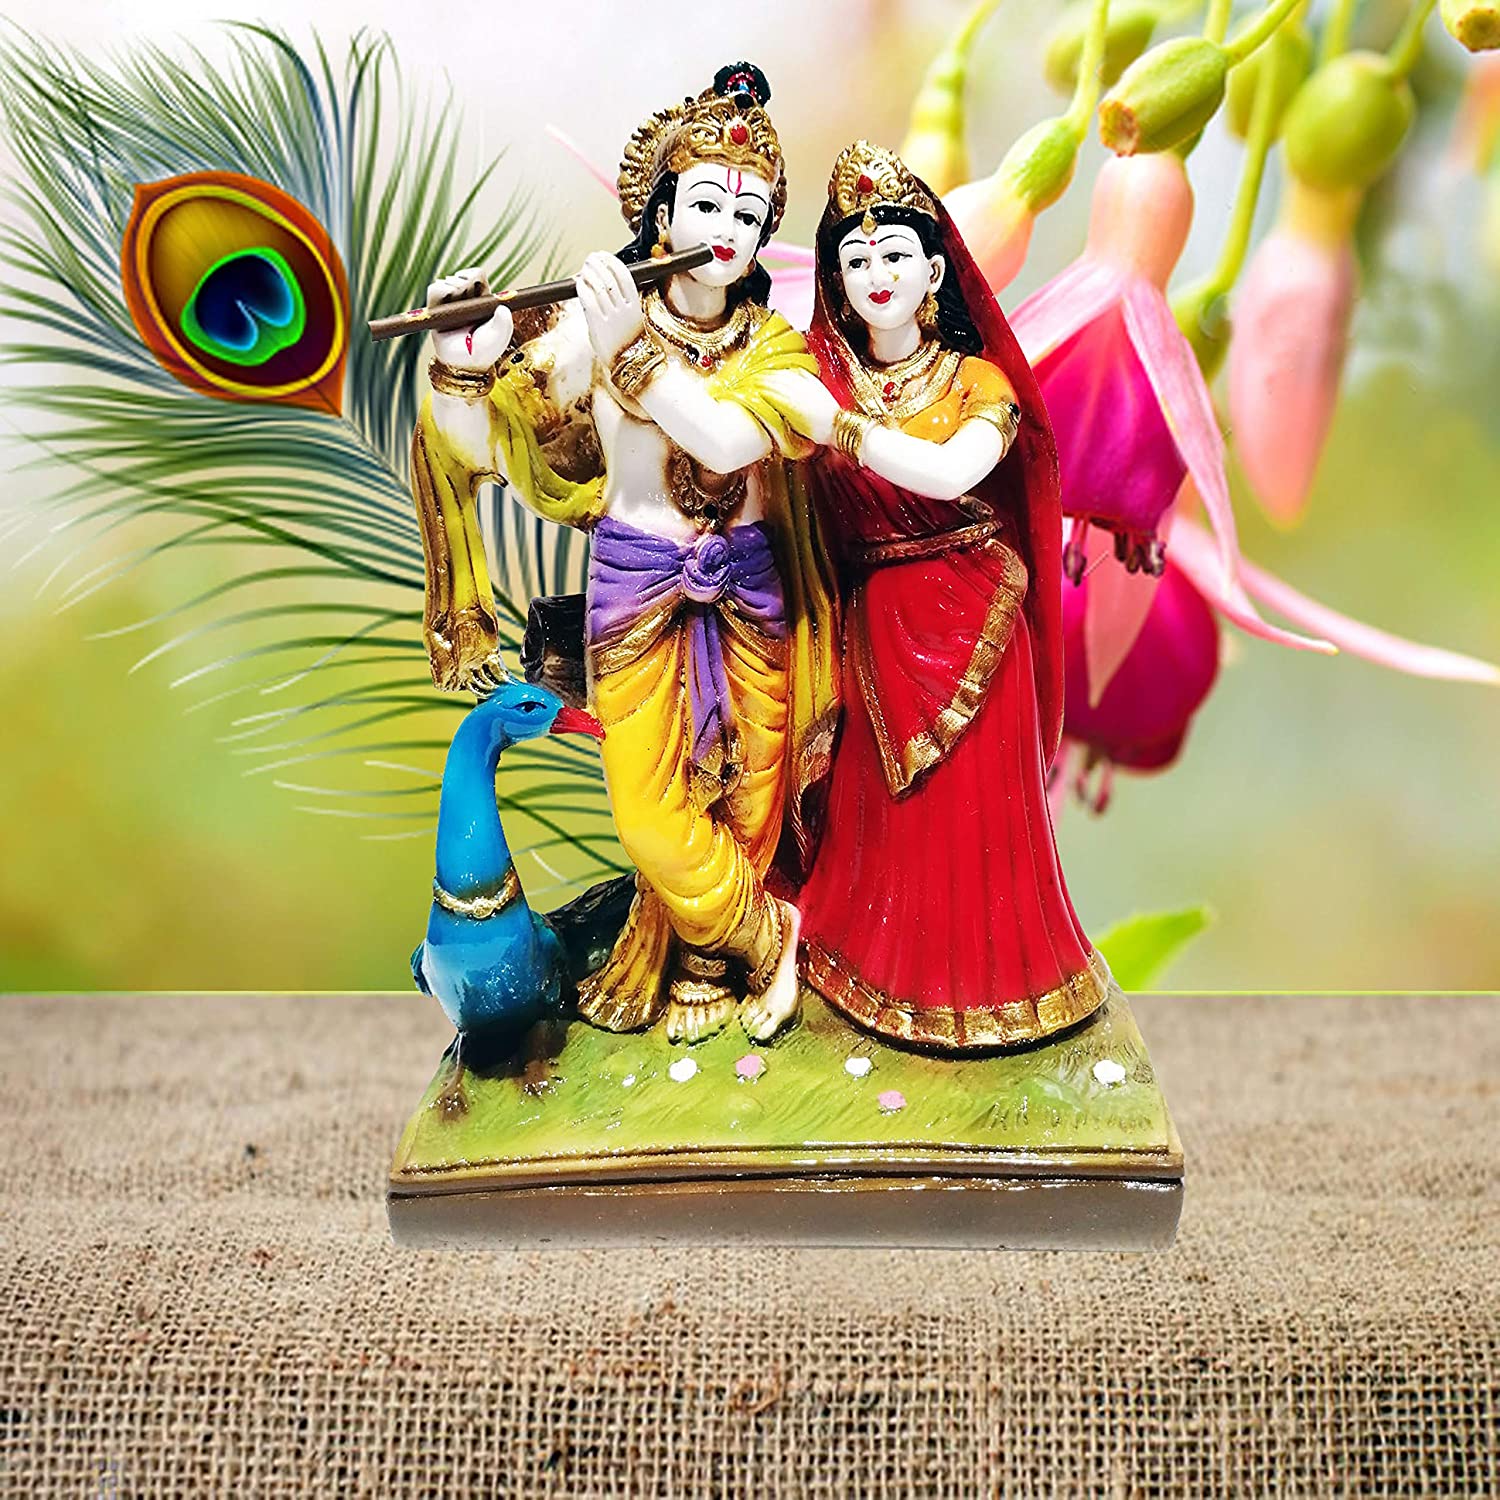 Buy Now Genuine Parad Idol - HK's Energized Parad Radha Krishna Idol For  Home/Office/Gift. - Visit now for best prices and Offers